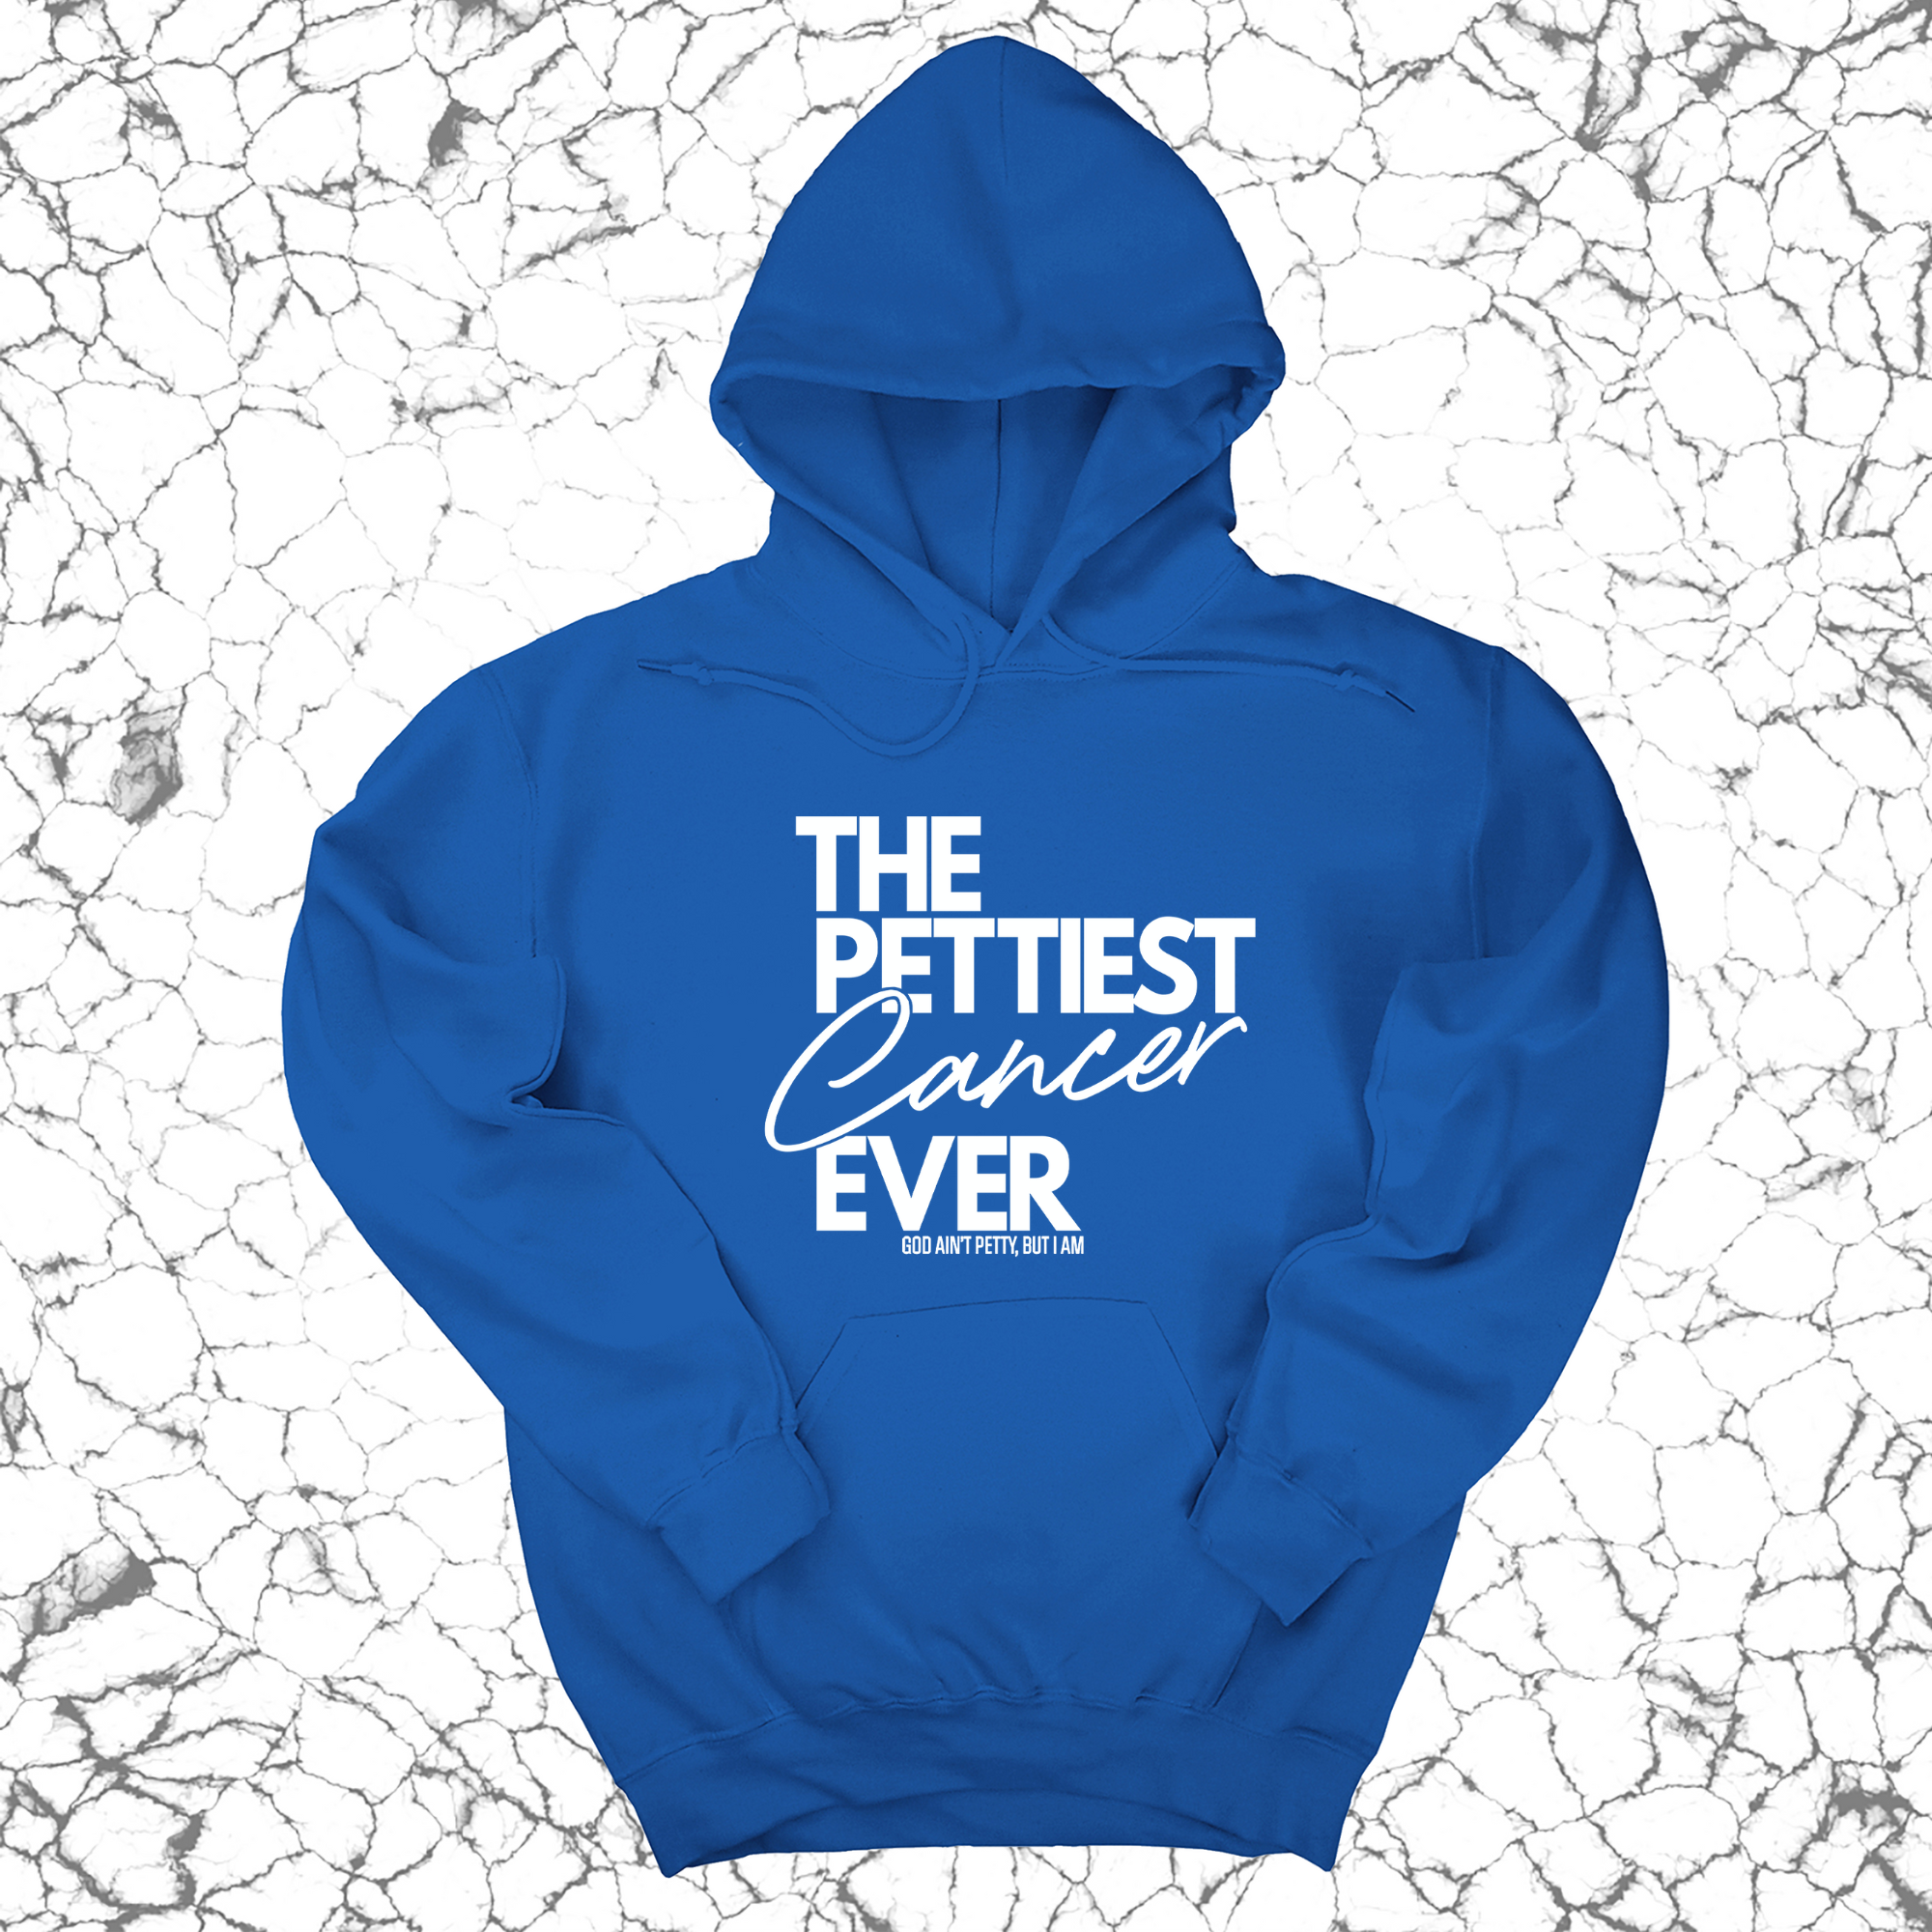 The Pettiest Cancer Ever Unisex Hoodie-Hoodie-The Original God Ain't Petty But I Am